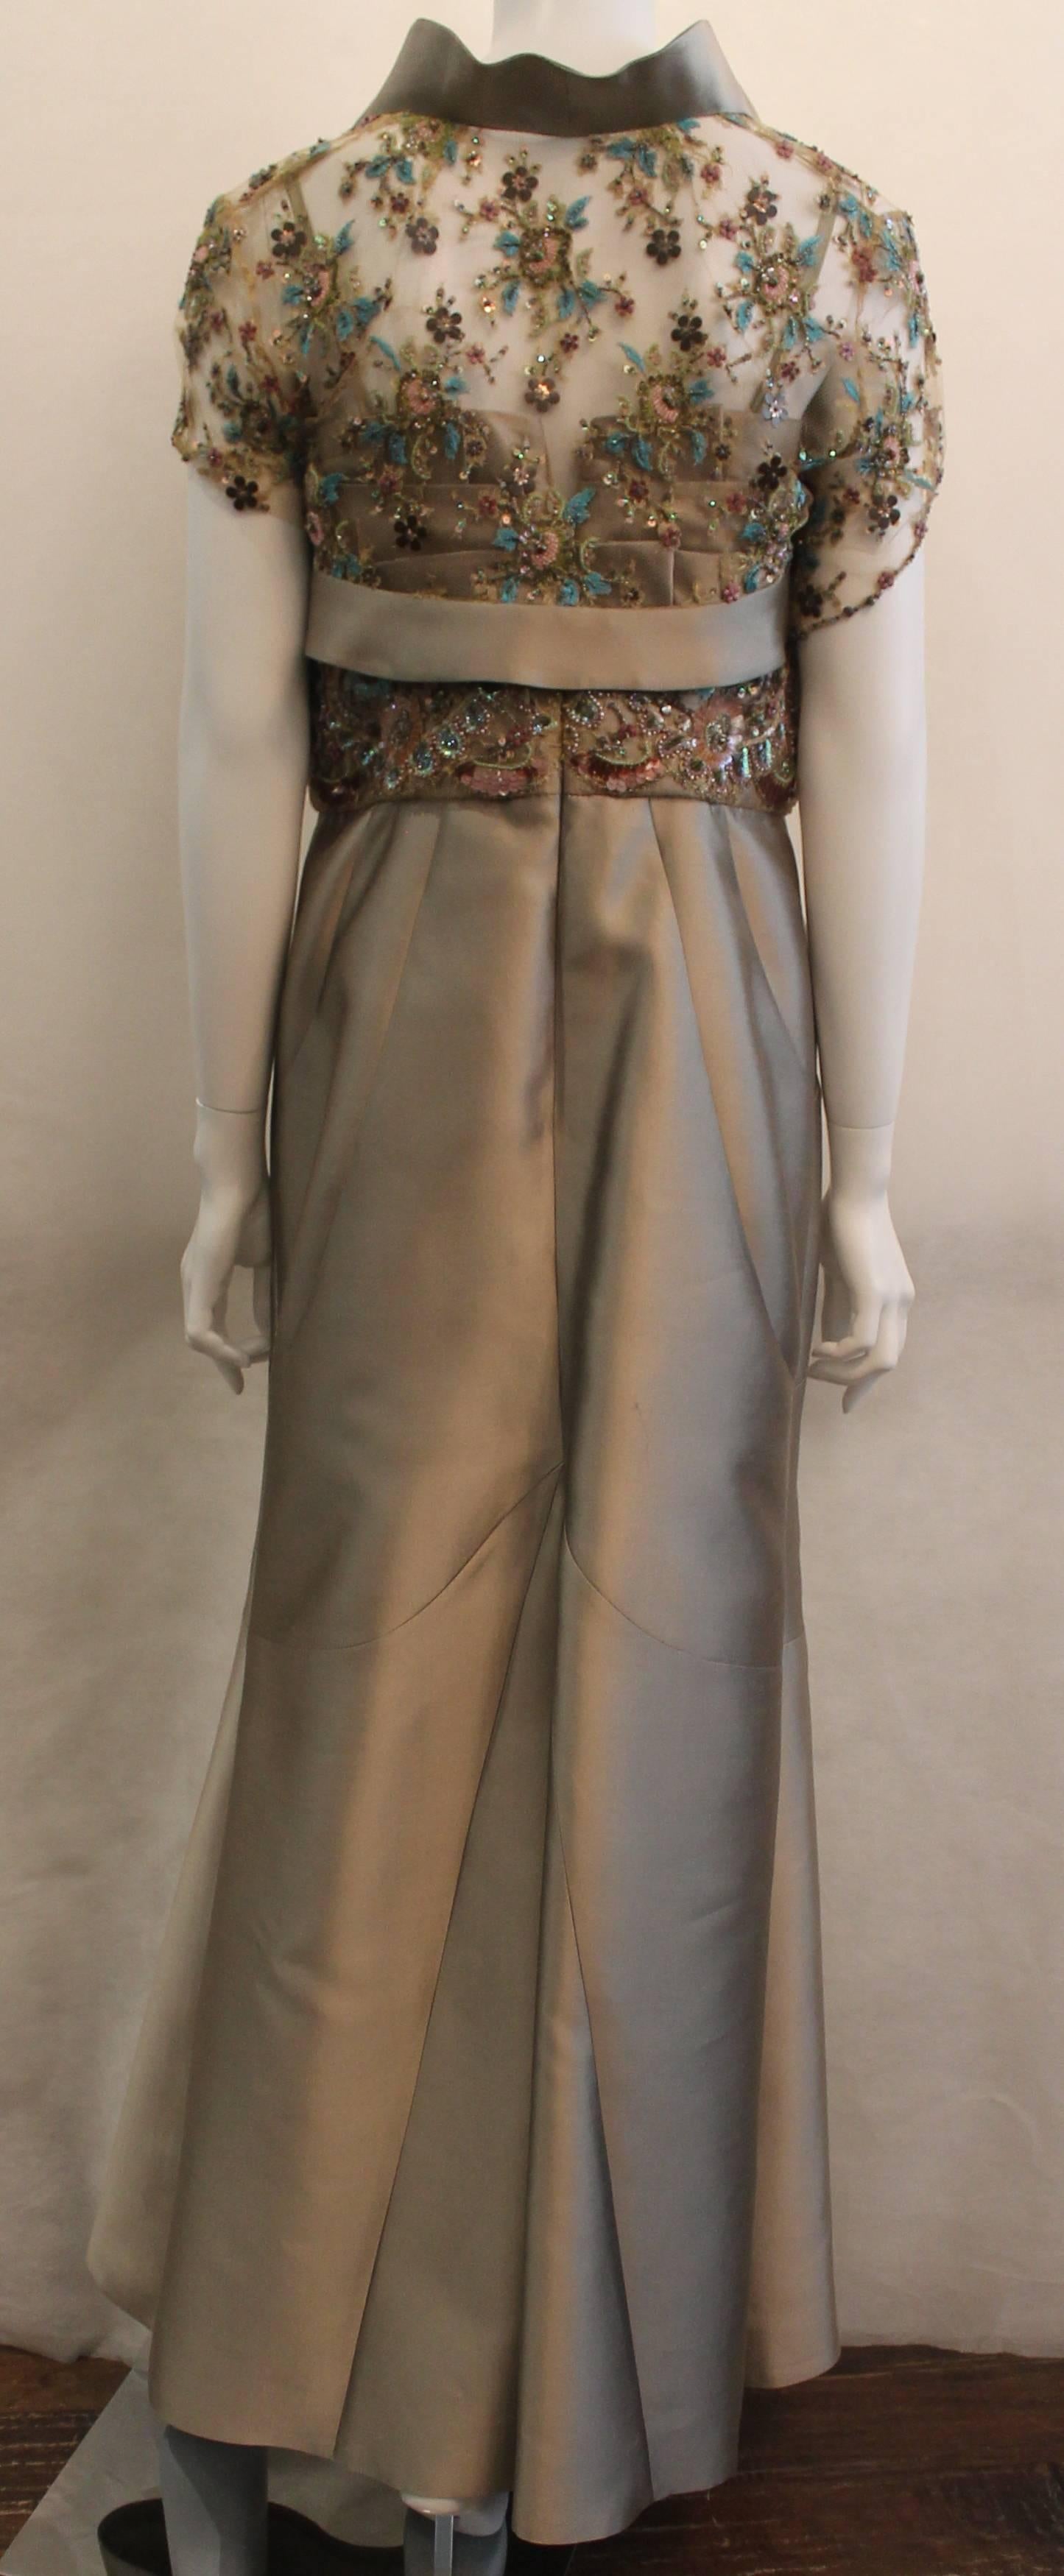 Gray Linda Cunningham Taupe Silk Gown w/ Multi Floral Lace & 3 Tier Ruffle Bust - 10 For Sale